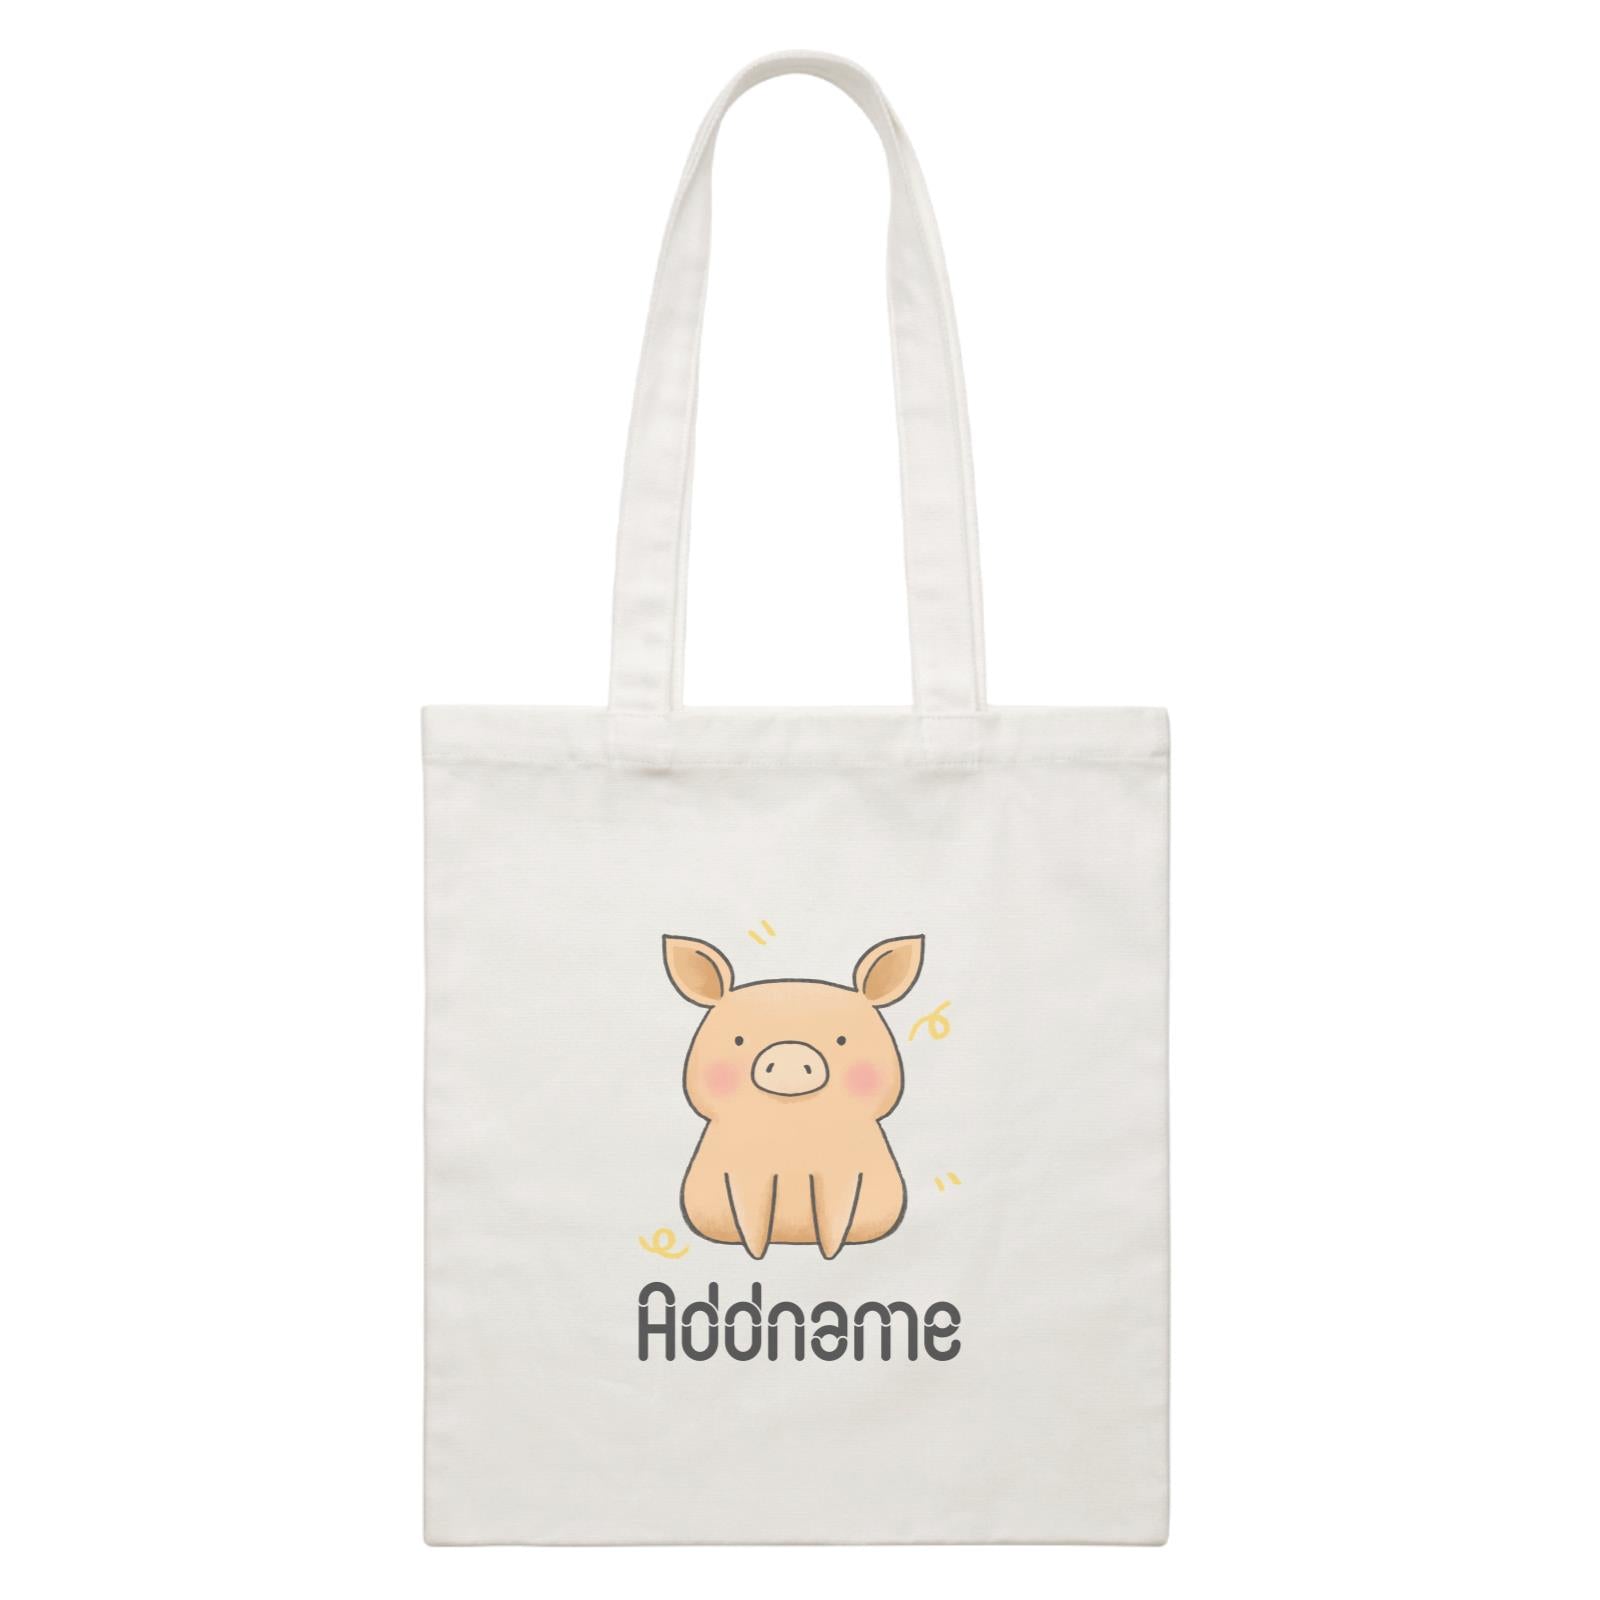 Cute Hand Drawn Style Pig Addname White Canvas Bag